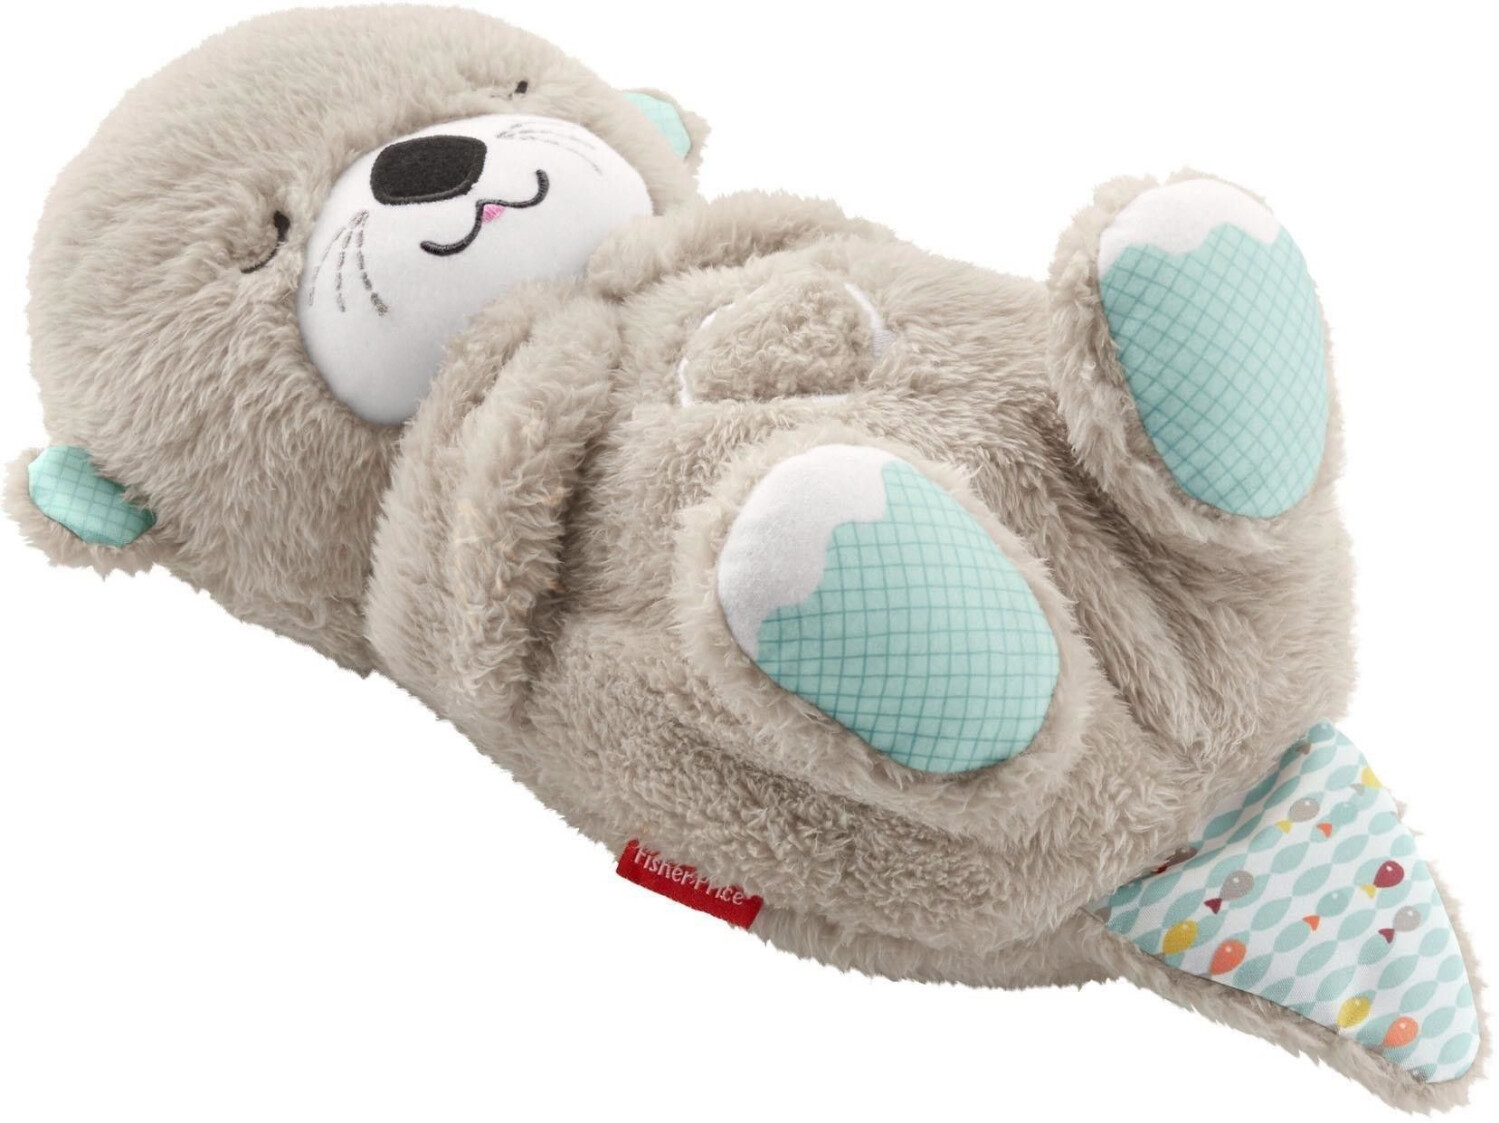 Fisher-Price Original Soothe N Snuggle Otter, Soothing Toy with Light,  Music and Breathing Motion! : : Baby Products